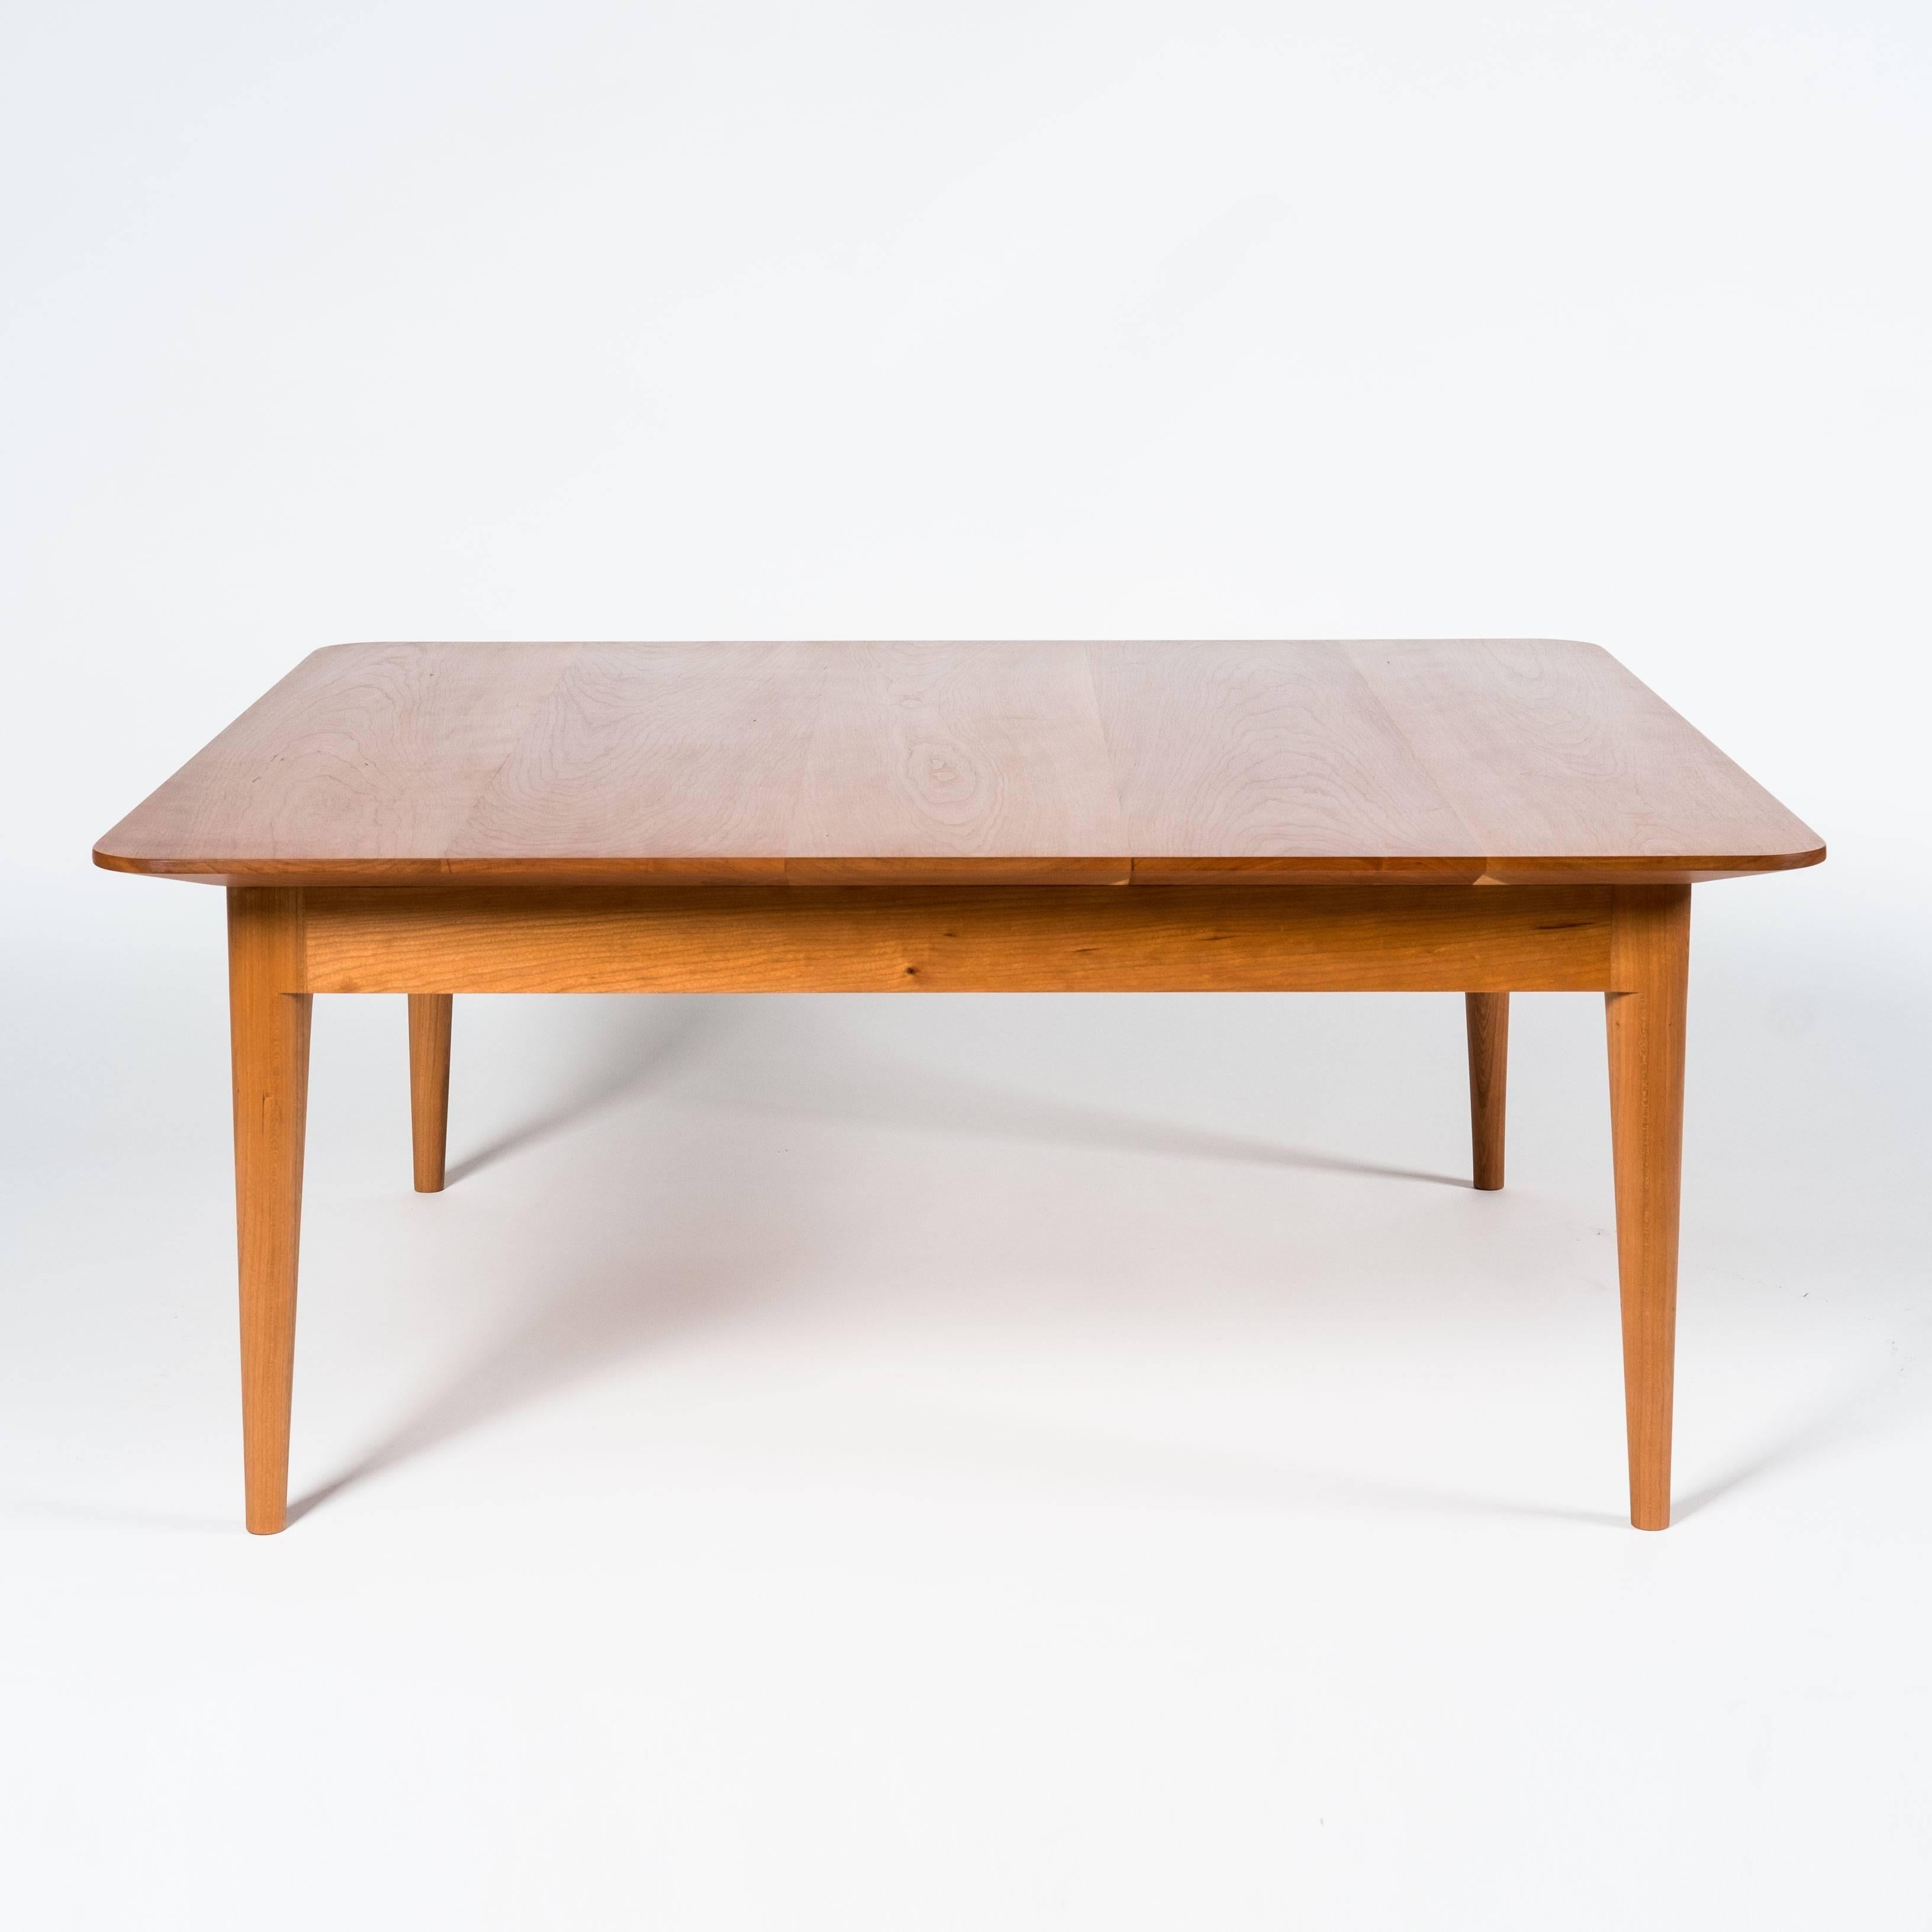 Spire Square Coffee Table by Tretiak Works, Cherry Hand Shaped and Turned (Gedrechselt) im Angebot